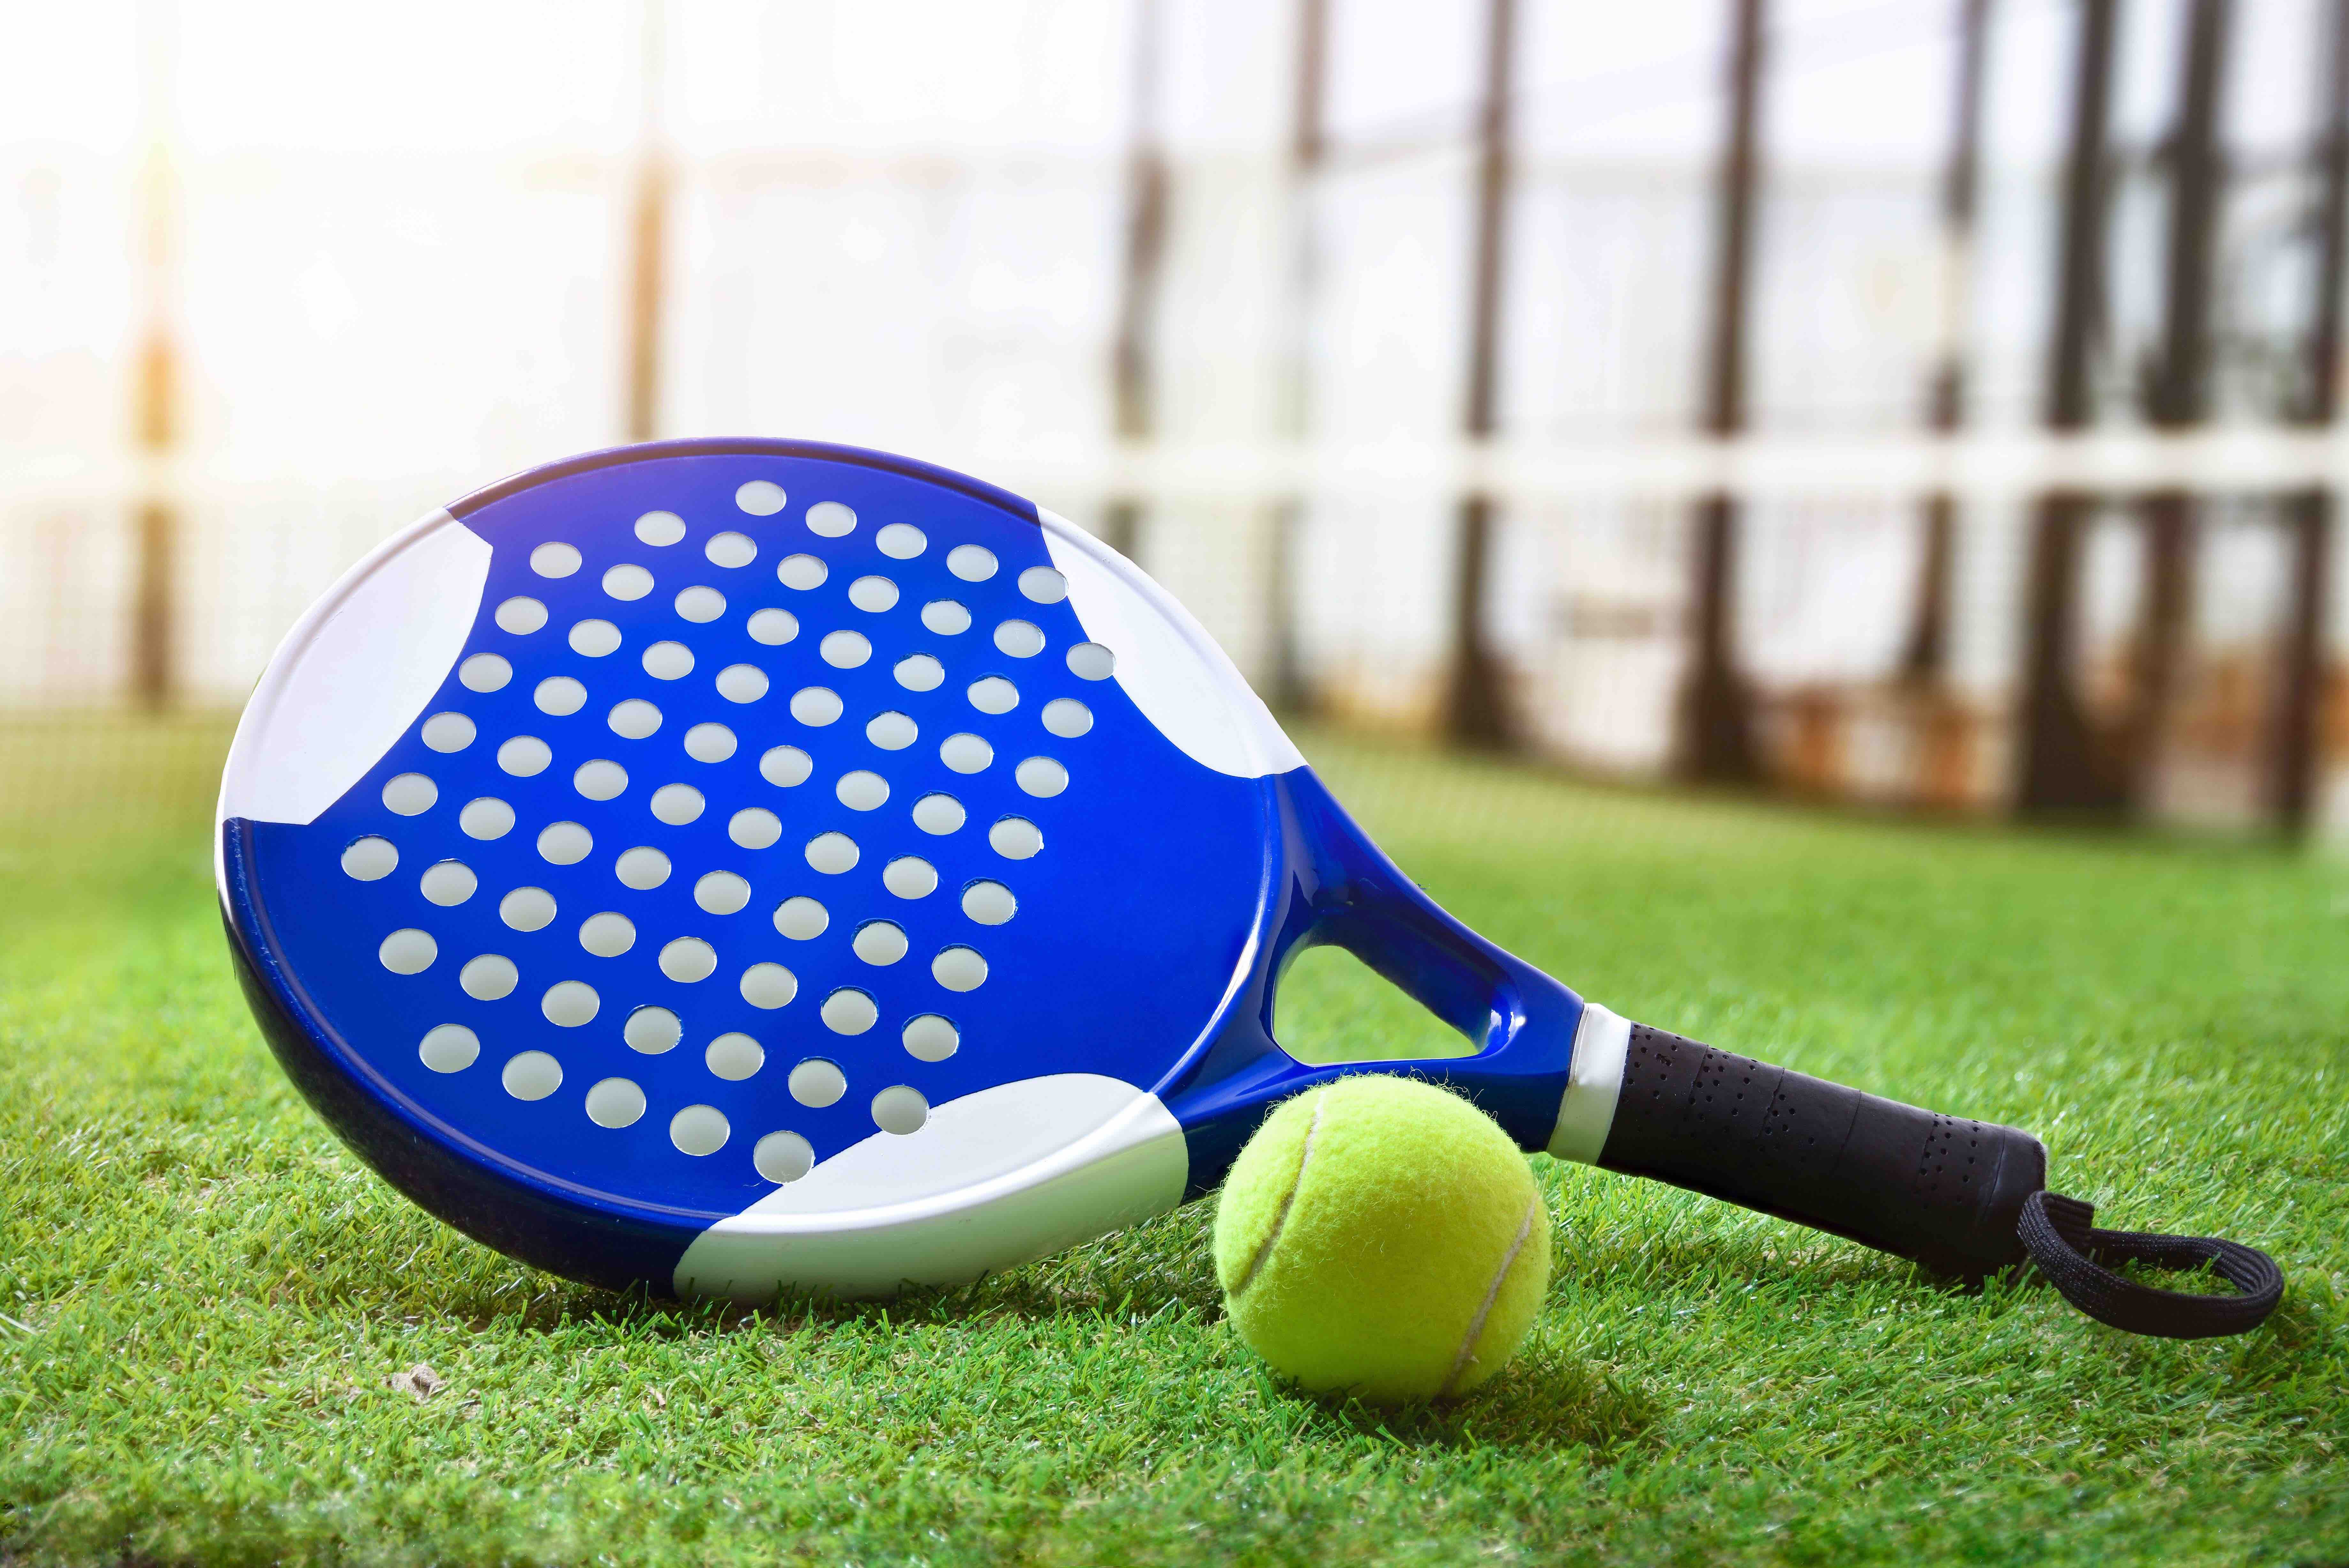 Padel Tennis or Paddle Tennis: What Is Padel Tennis and How to